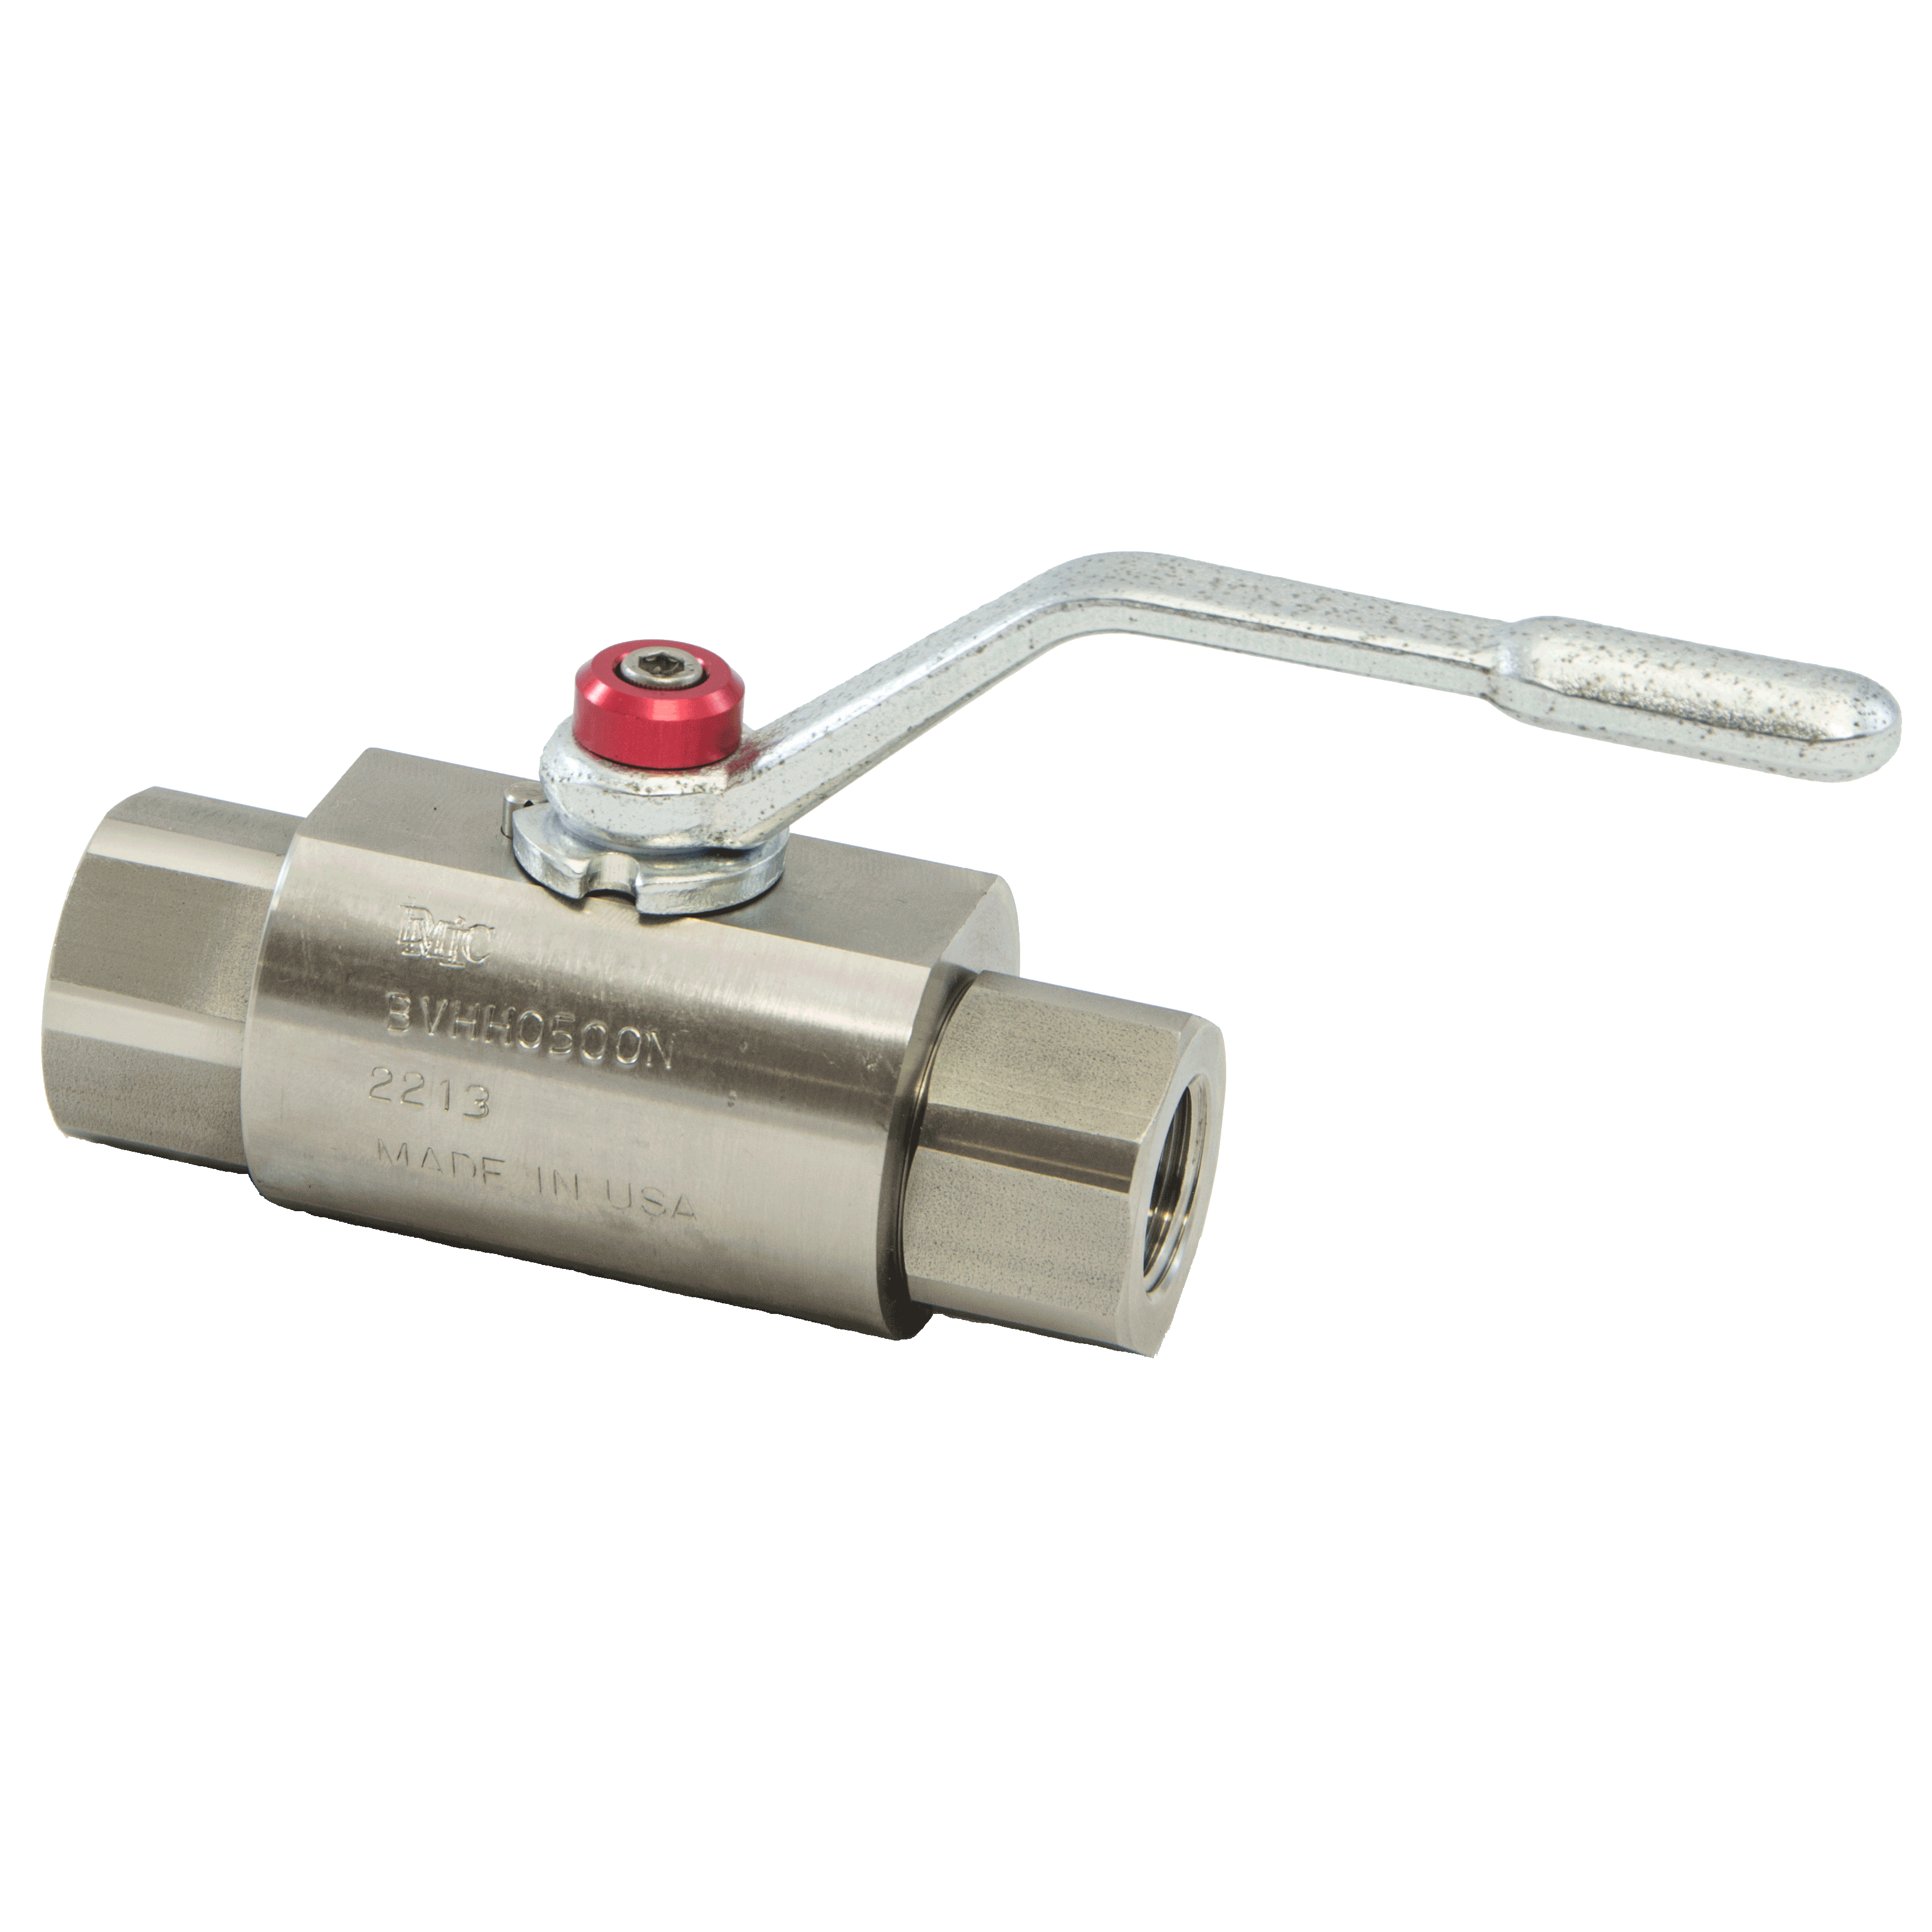 BVHH-1250S-2211 : DMIC Super High Pressure Ball Valve, #20 SAE (1.25), 316 Stainless Steel, 10000psi, Two-Way